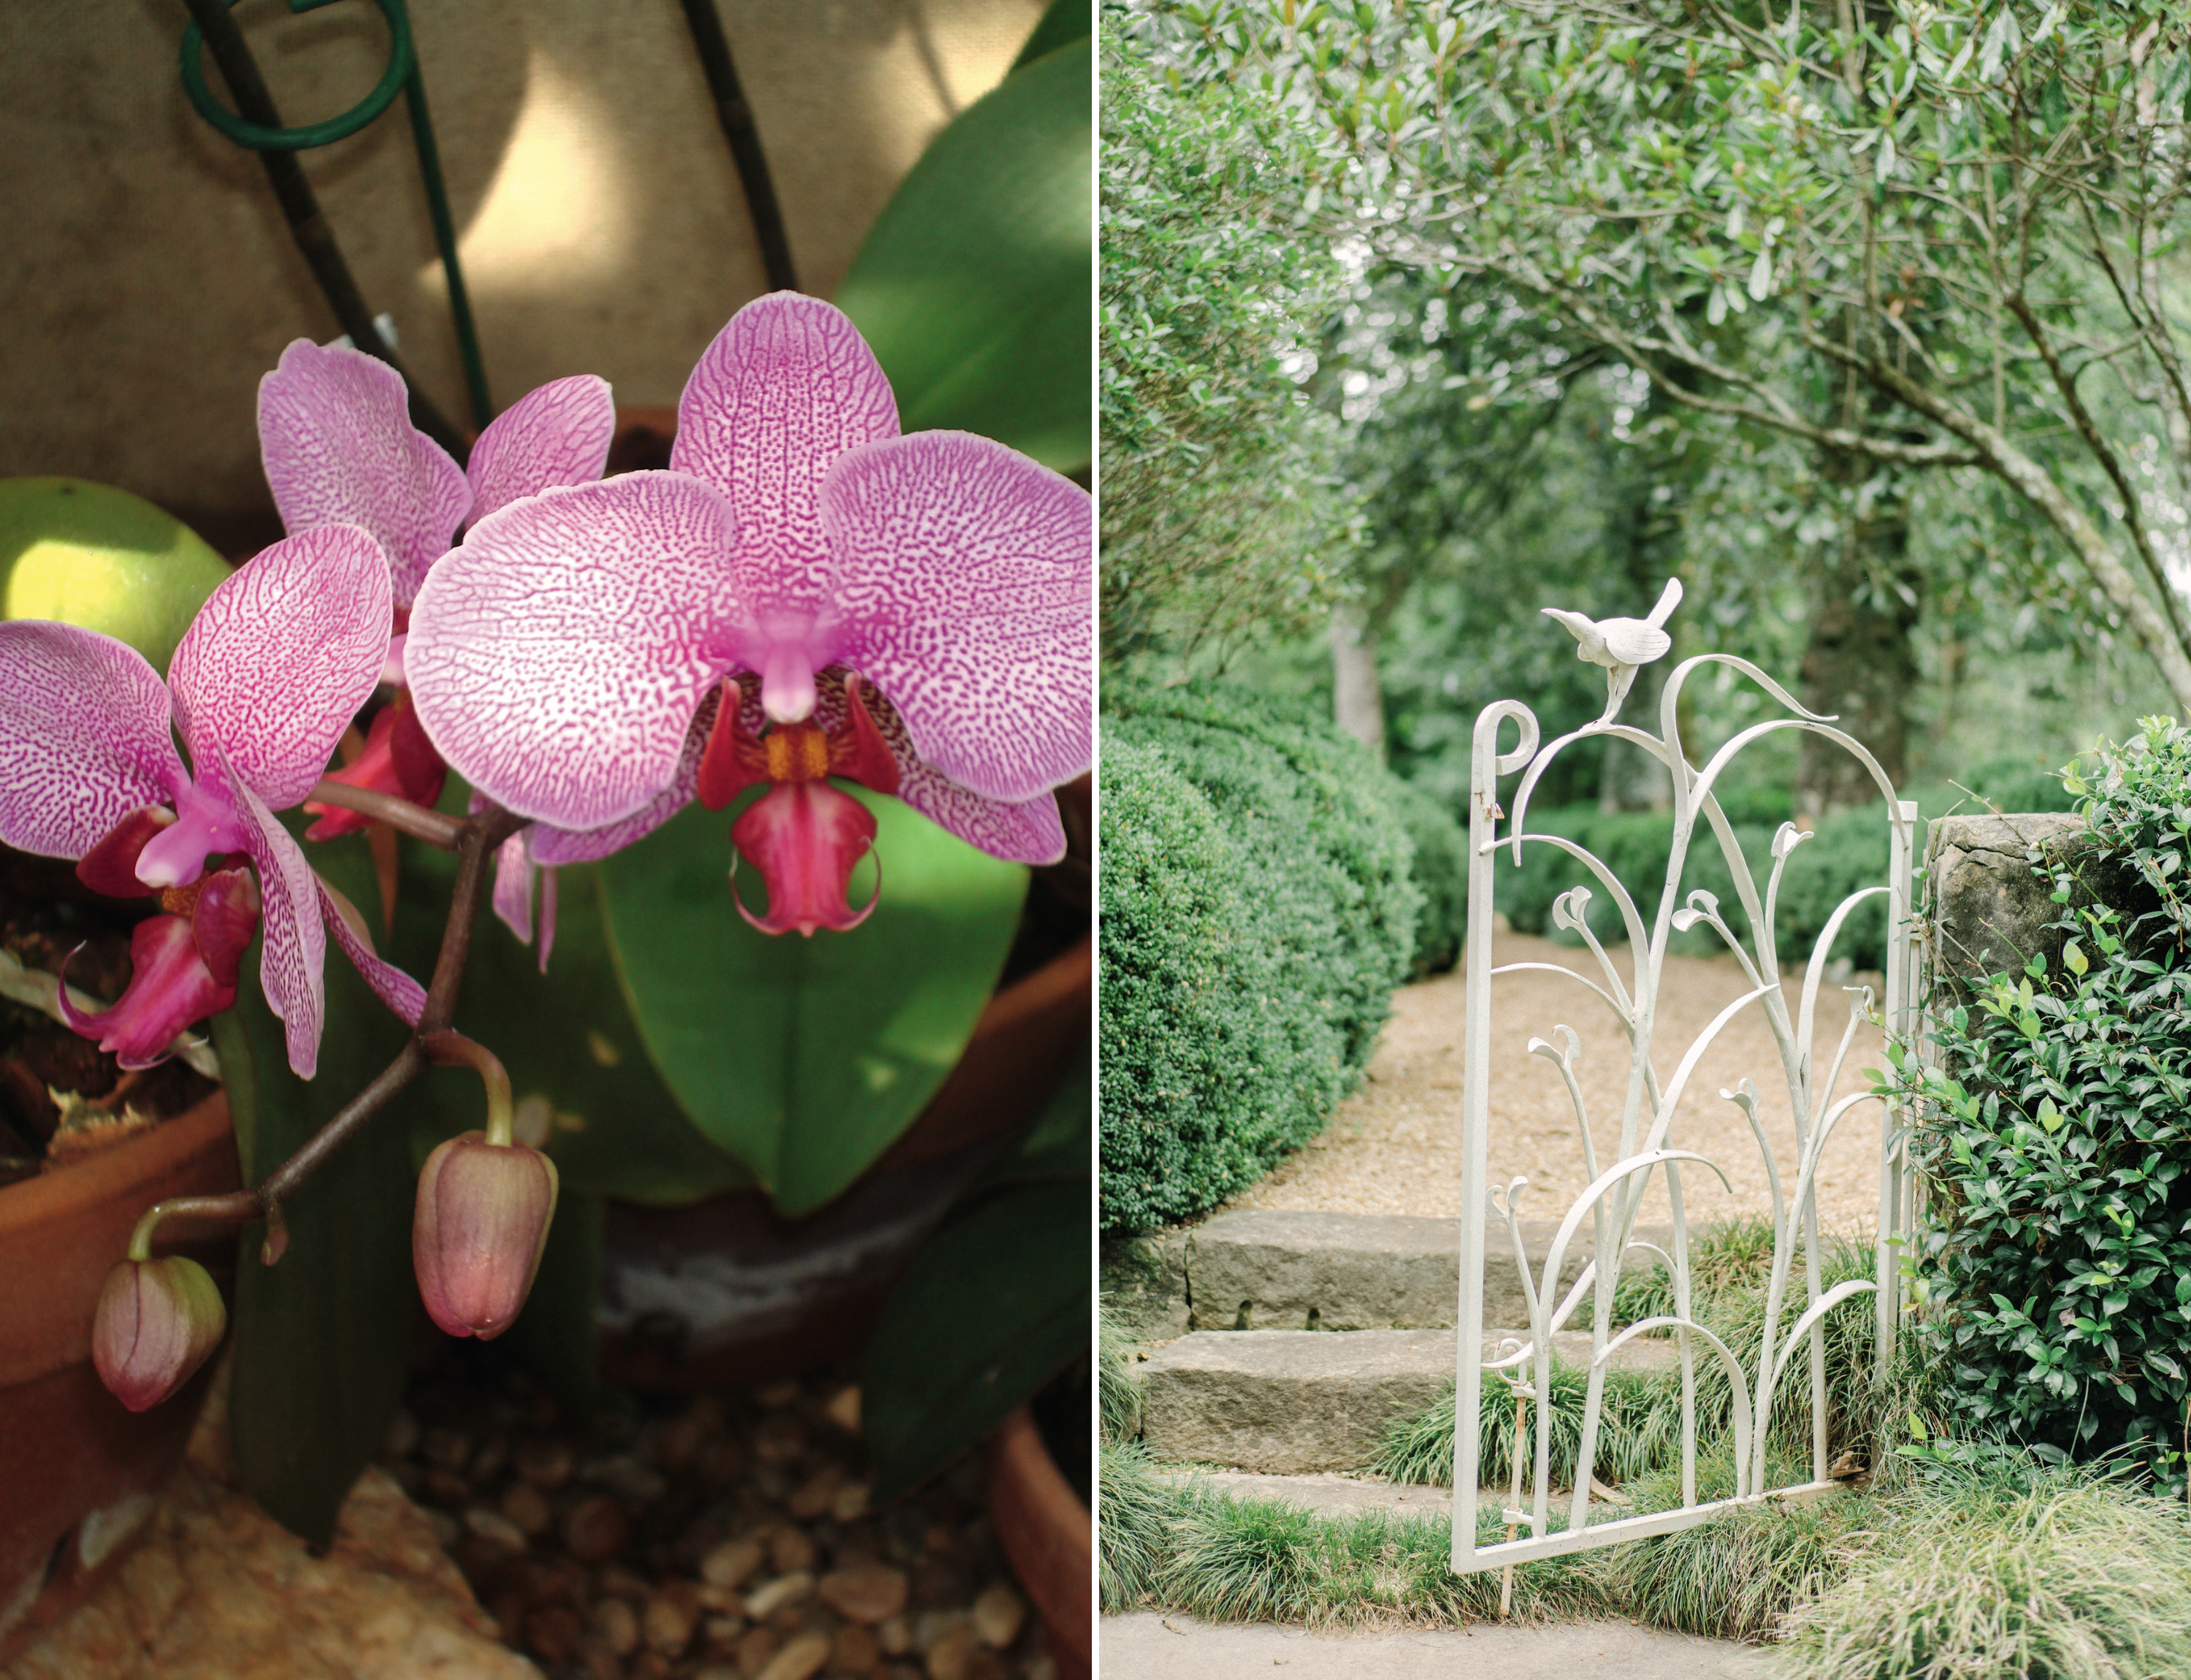 A collage of two images. Left: Two pink orchids in bloom. Right: A white gate with an iron bird on top; it is surrounded by a green path.